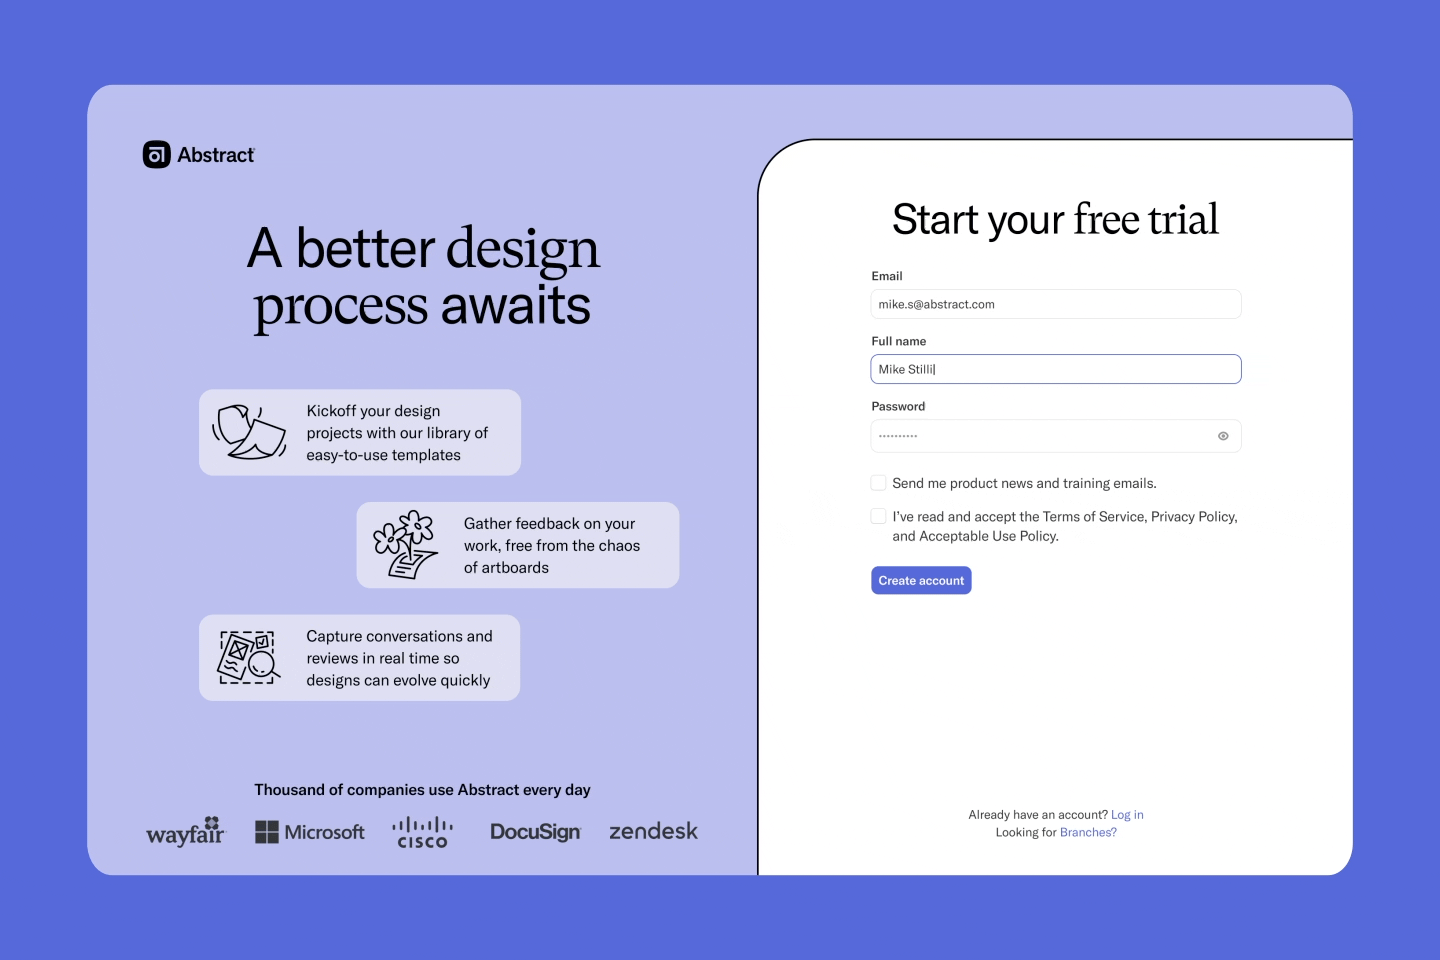 A signup flow Mike designed for Abstract